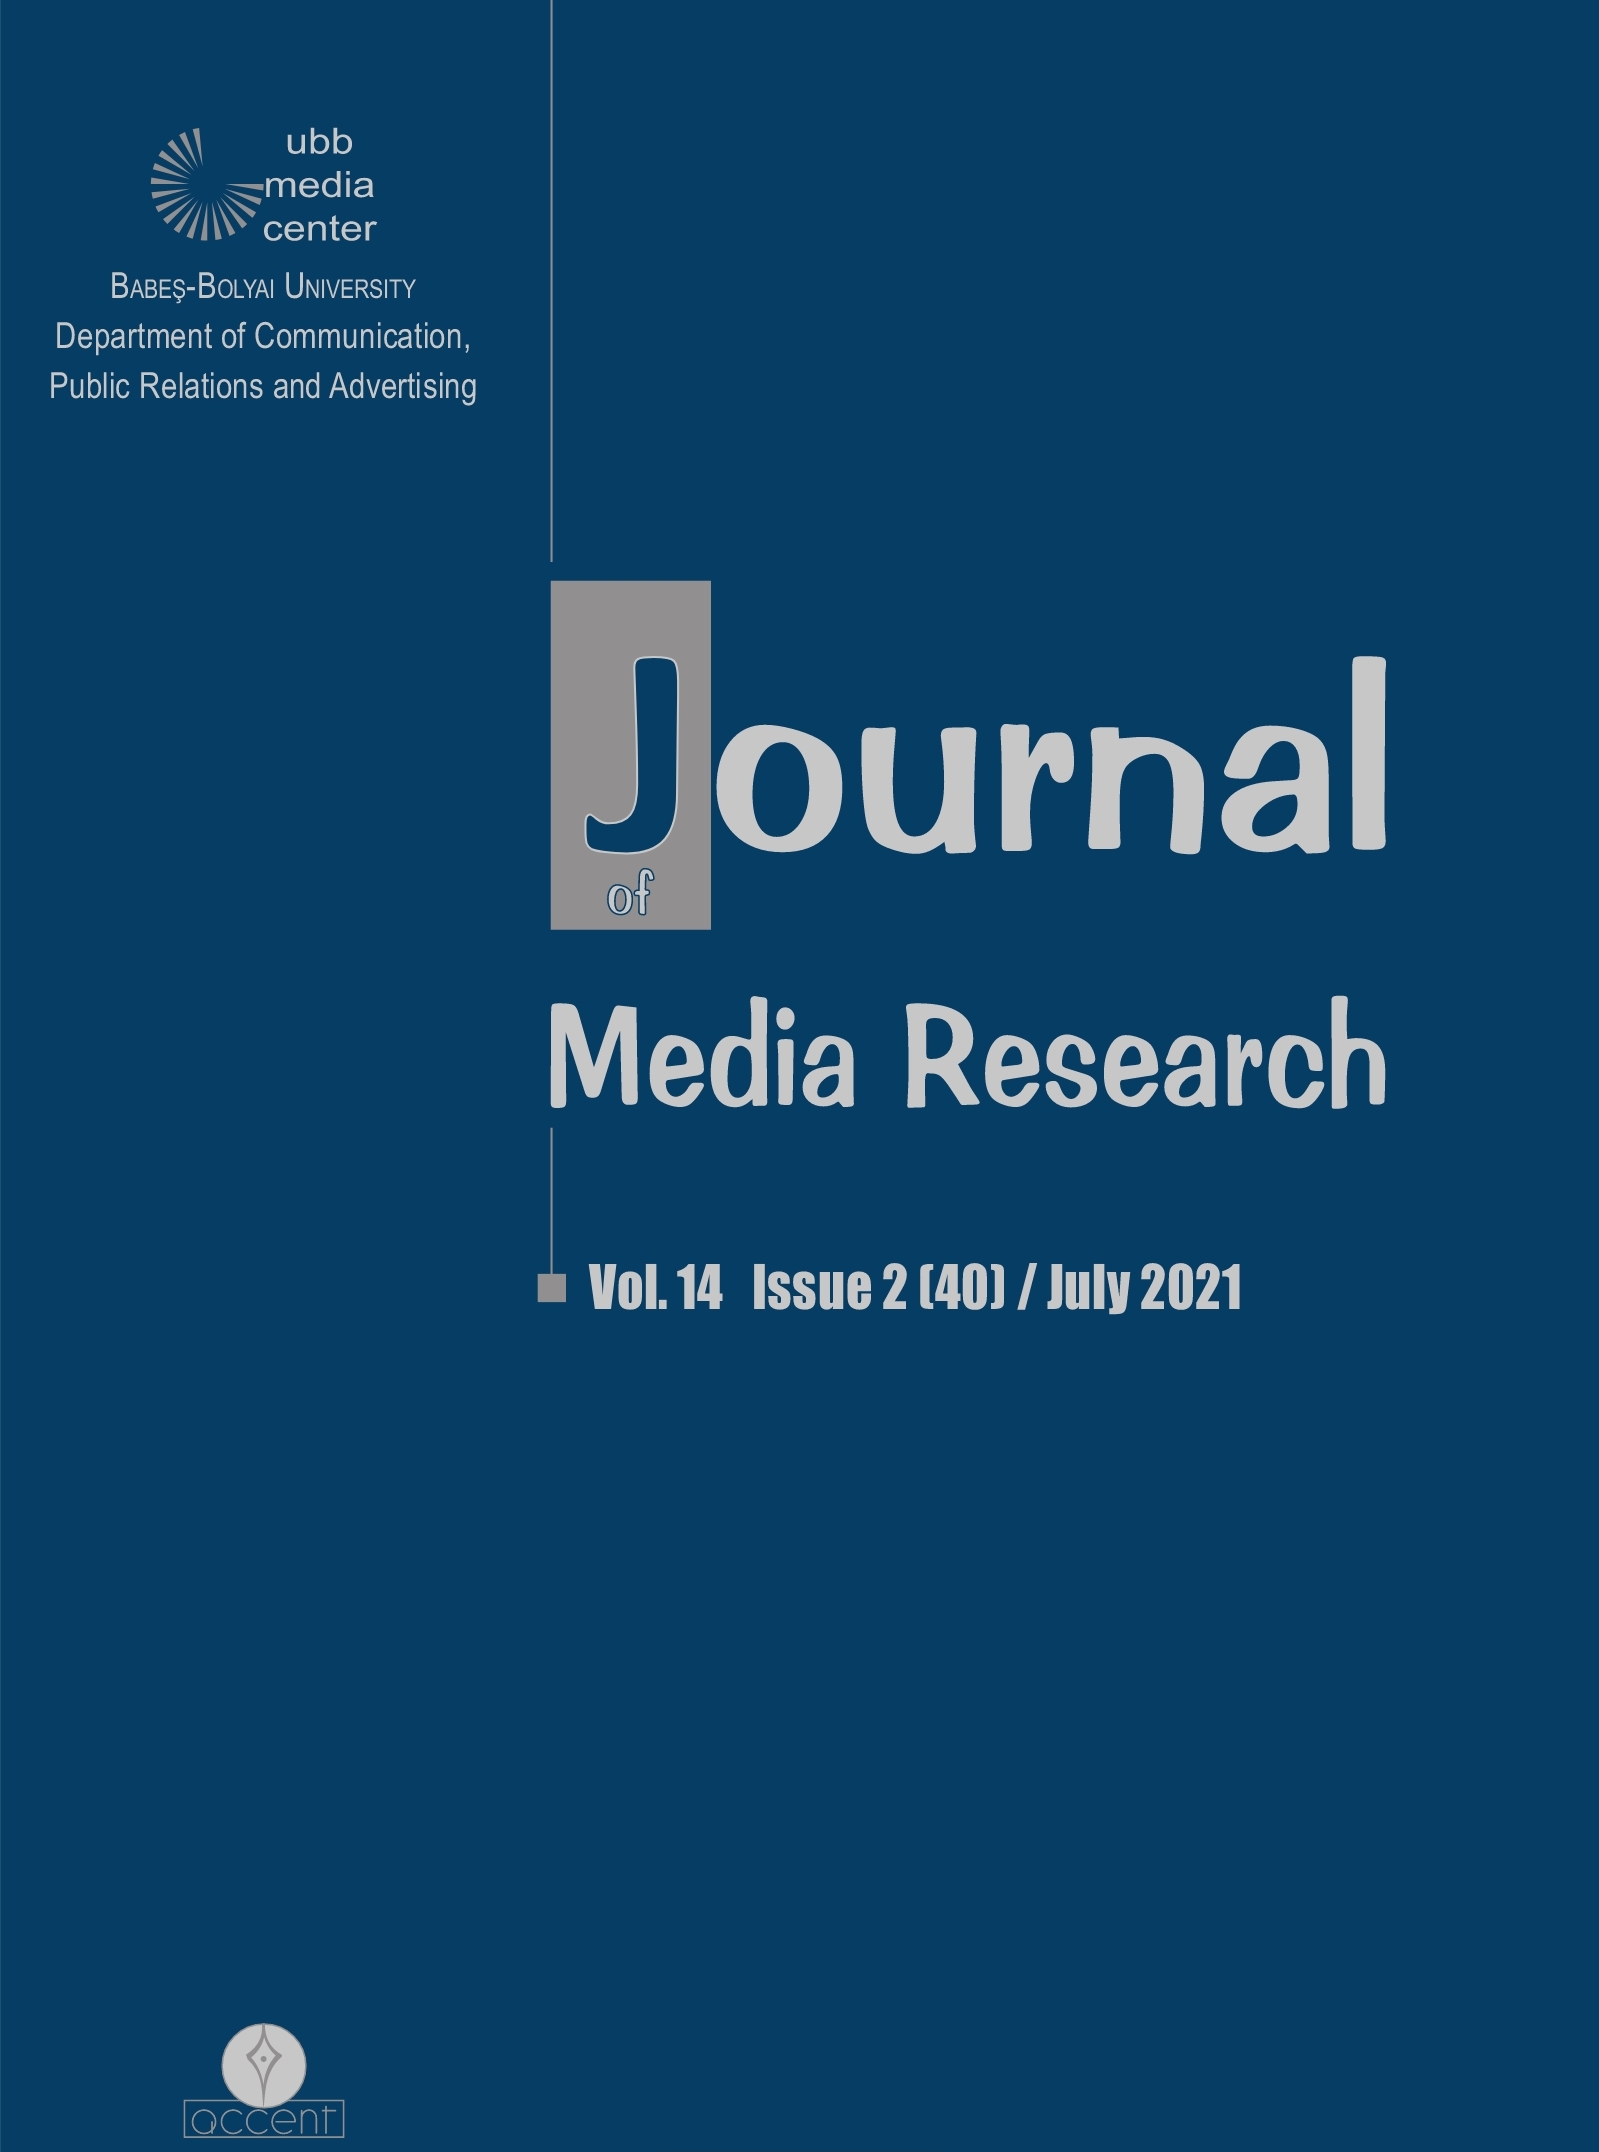 Sociodemographic Factors’ Influence on the Consumption and Assessment of COVID-19 Related Information - An International Web-Based Survey Cover Image